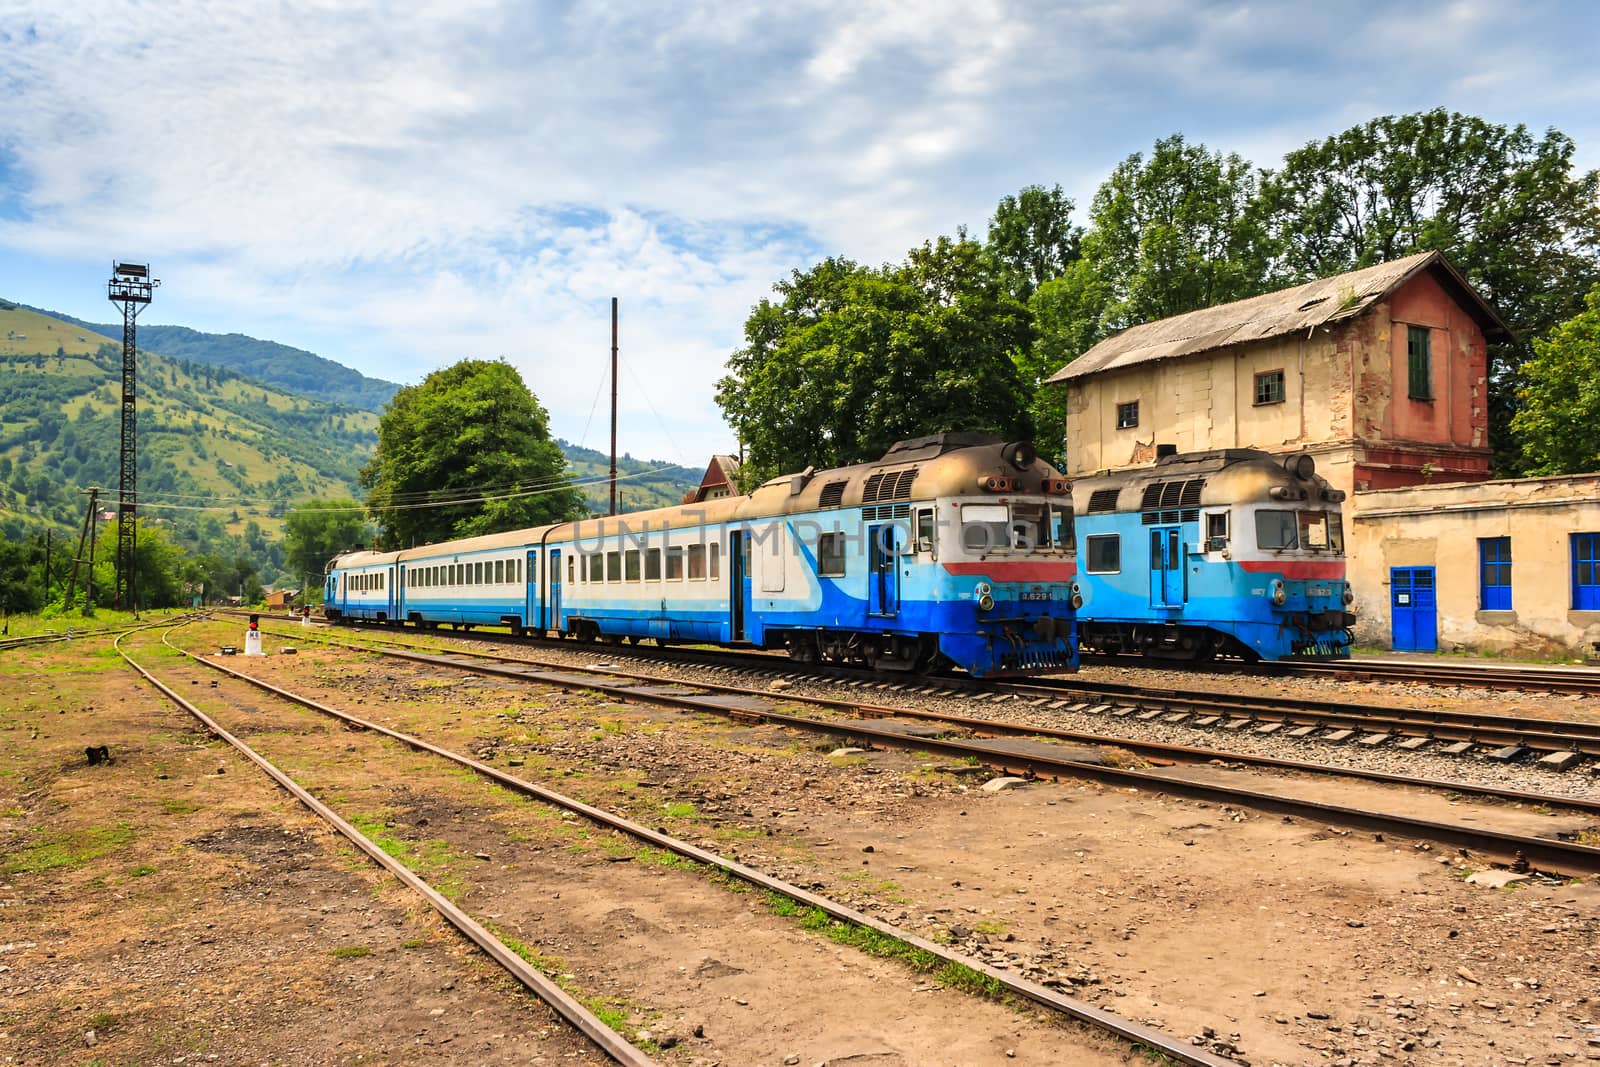 mountain railway station with two old blue train waiting passengers.